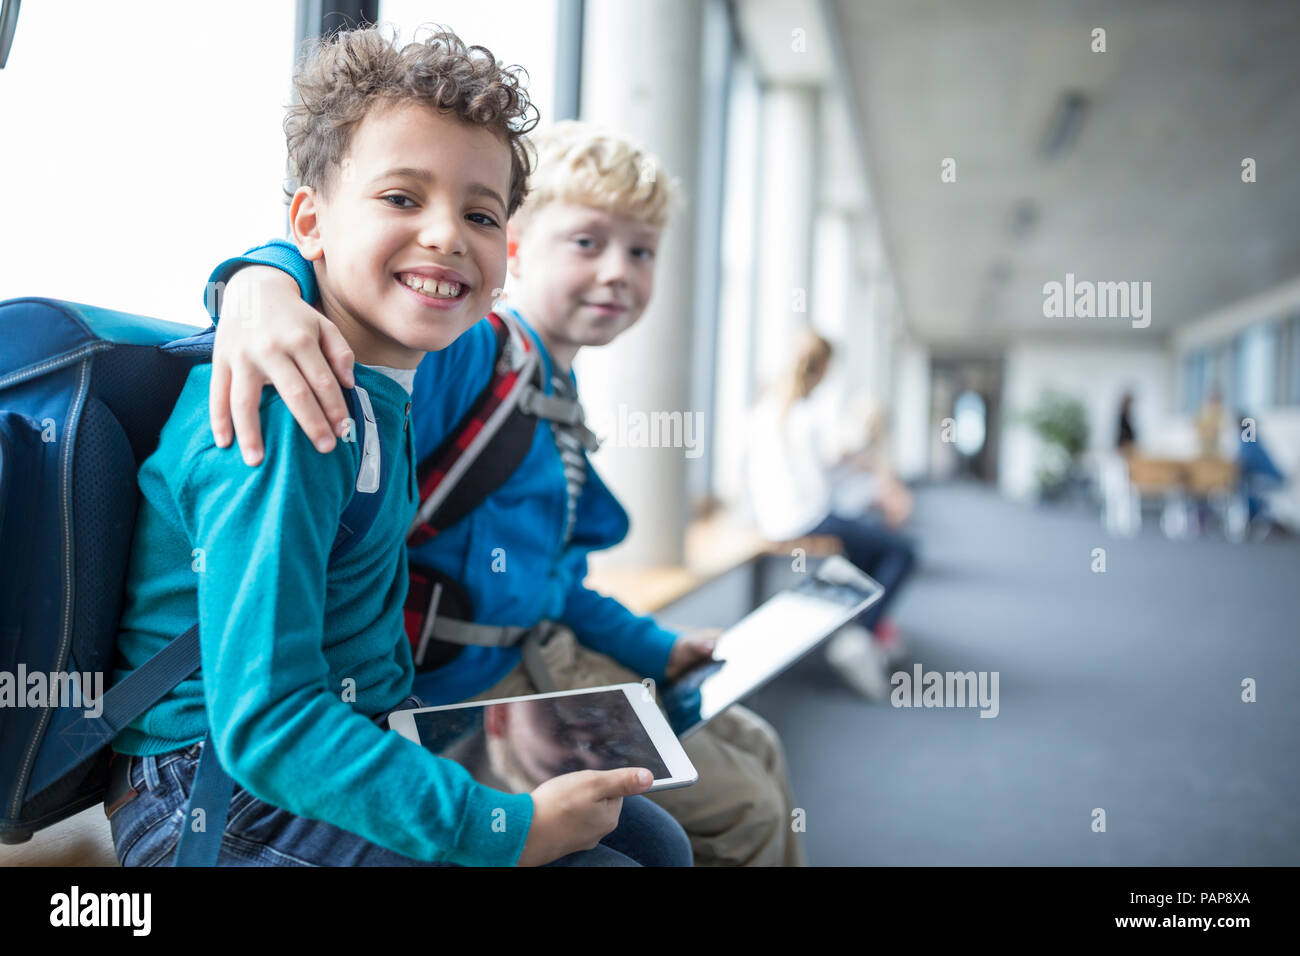 Portrait of two smiling schoolgboys with tablet embracing Stock Photo